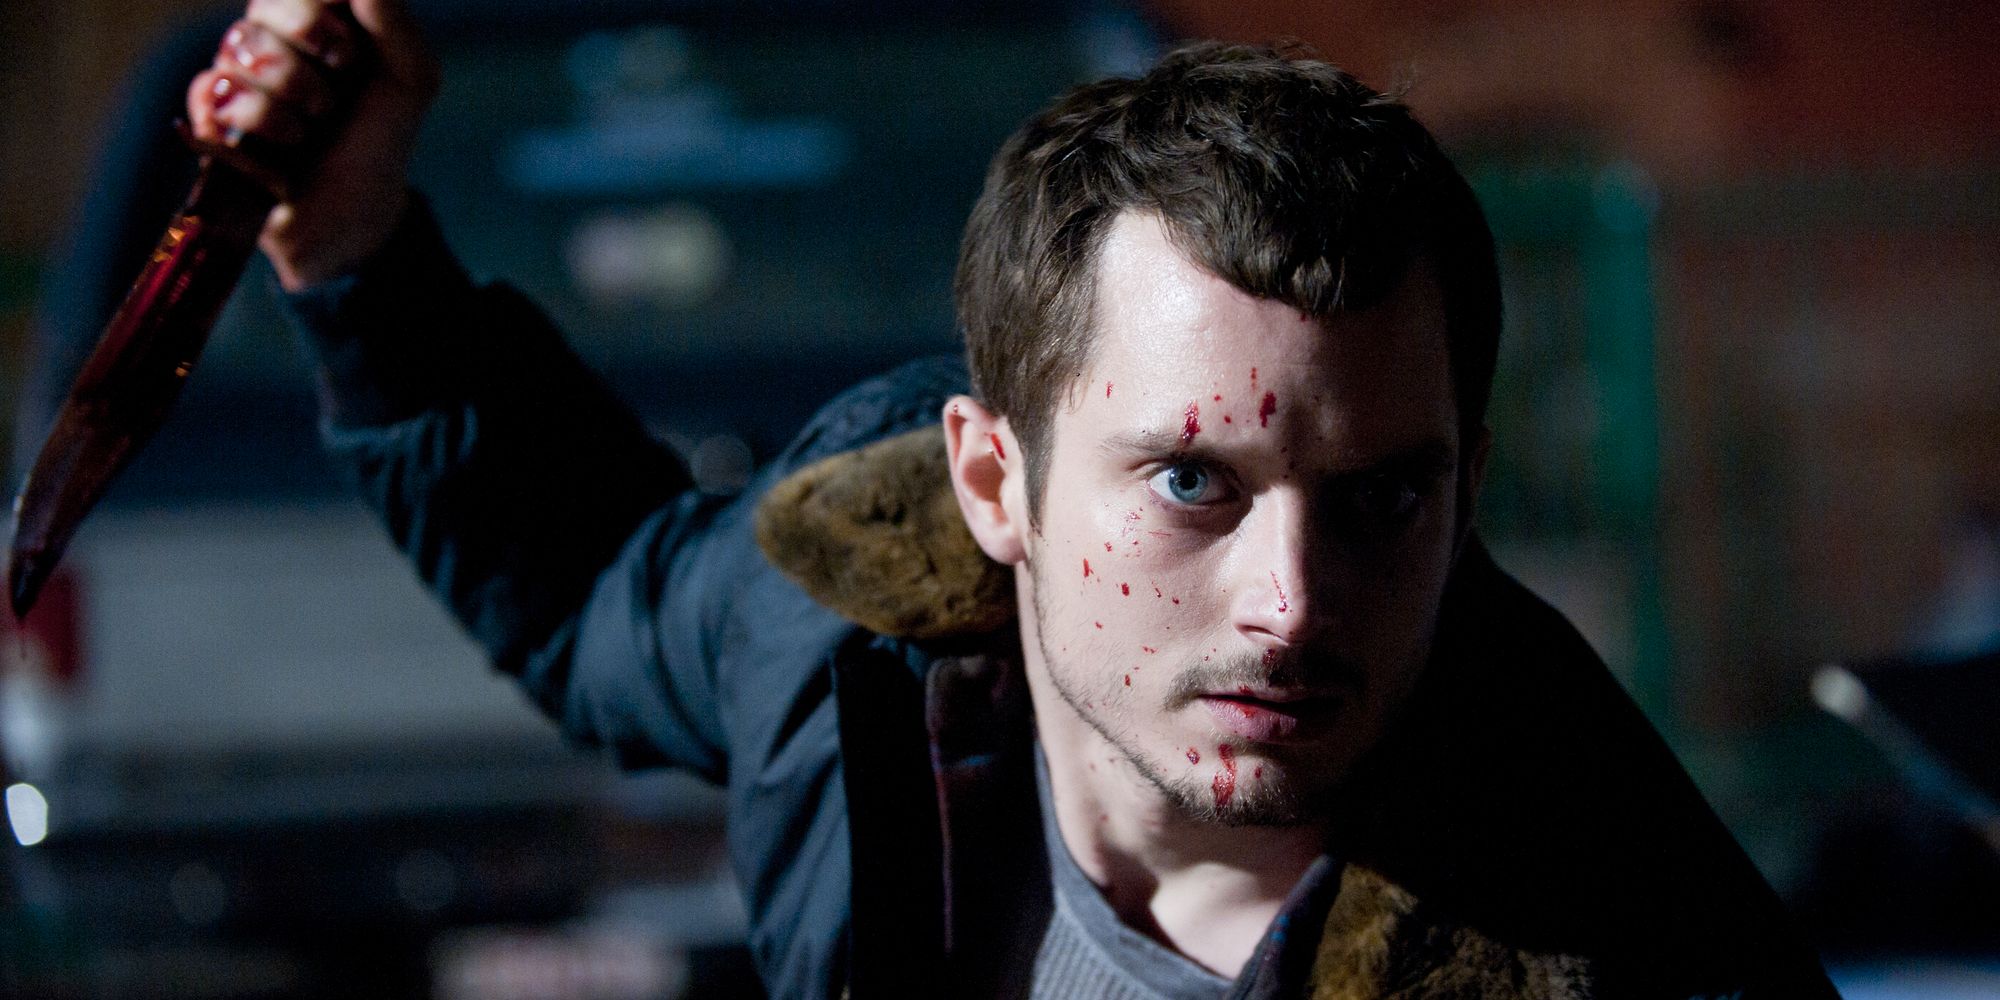 Still from 'Maniac': Frank (Elijah Wood) holds a knife with blood on his face.